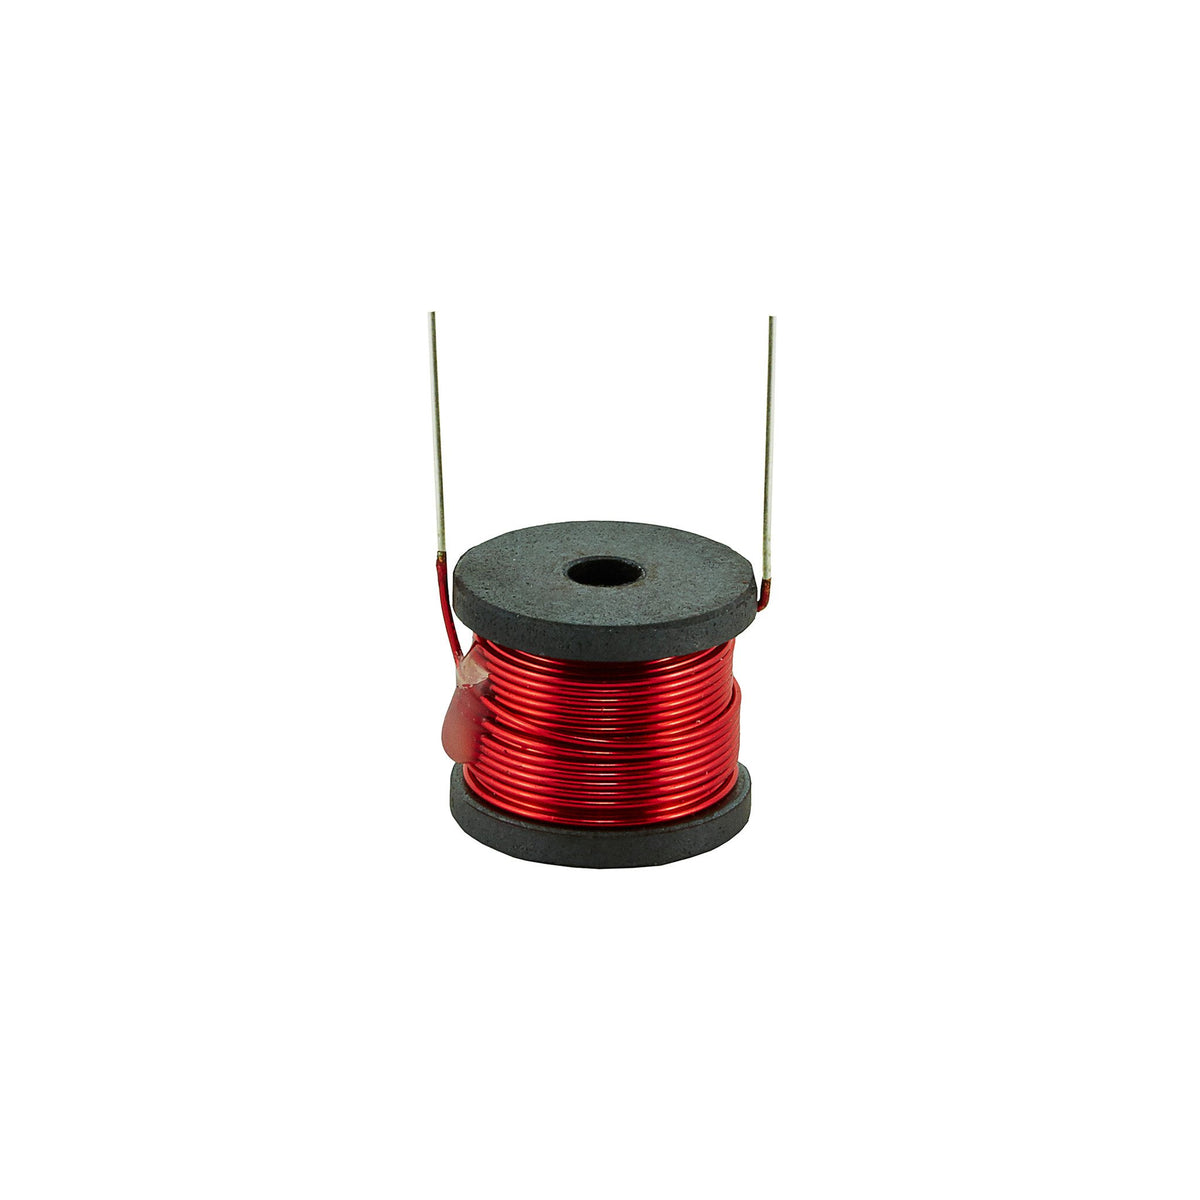 HiFi Crossover Inductor 0.68mH Iron Core - Willys-Hifi Ltd